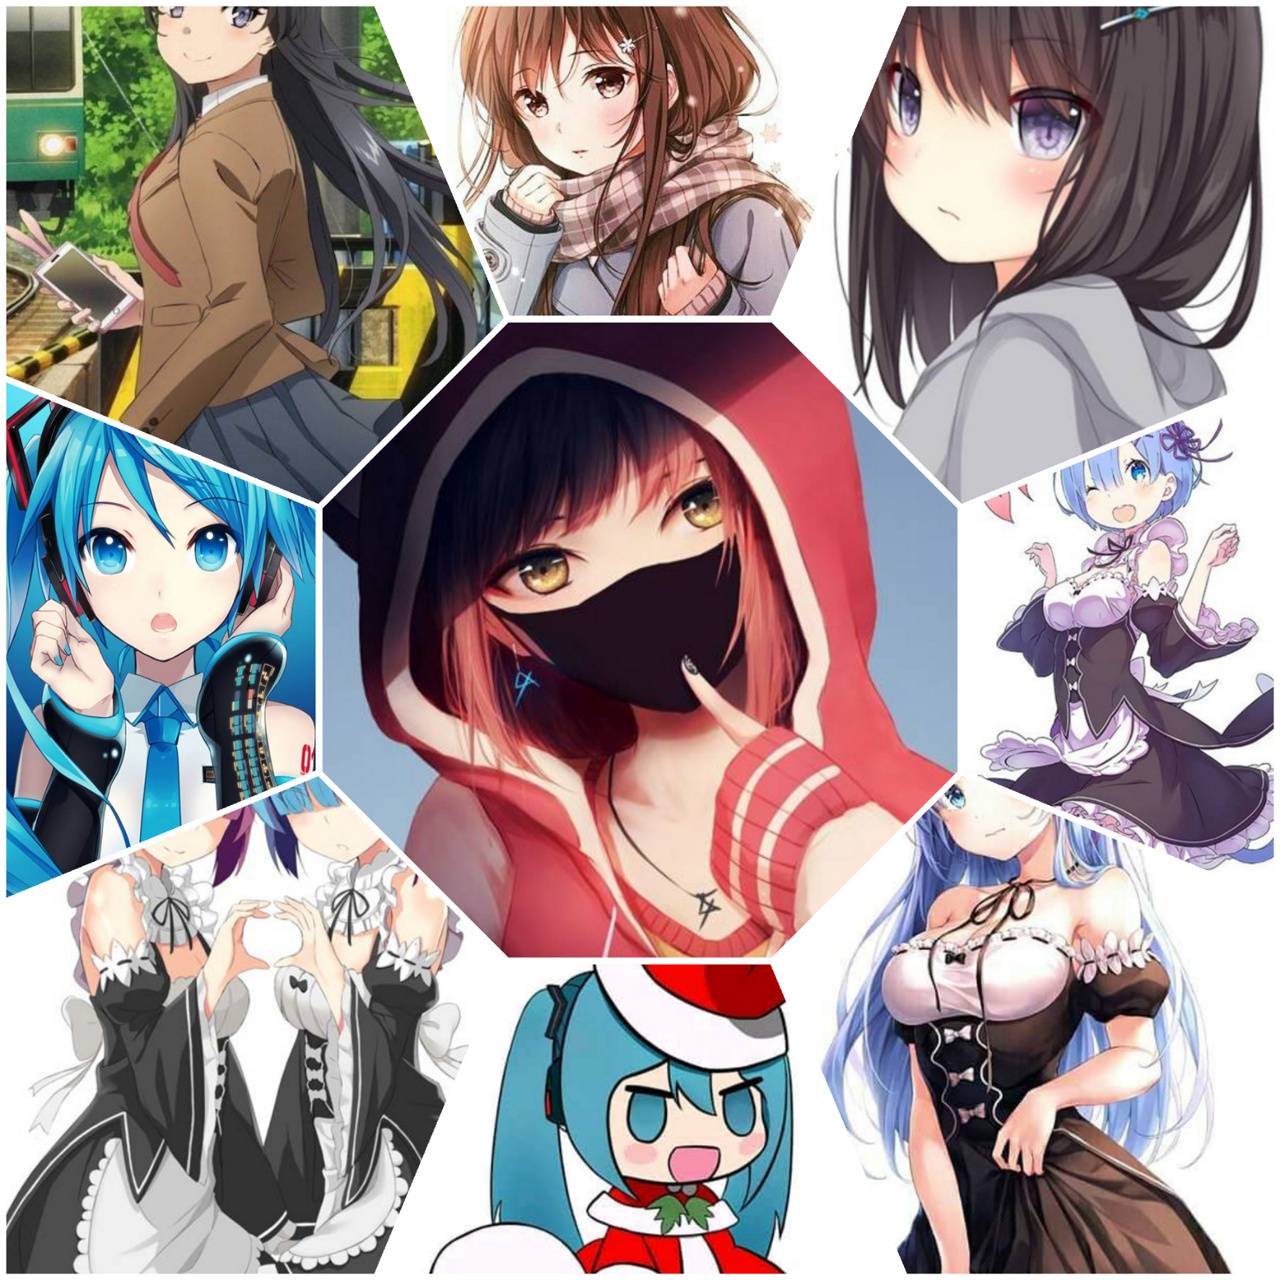 Anime Collage Wallpapers - Wallpaper Cave